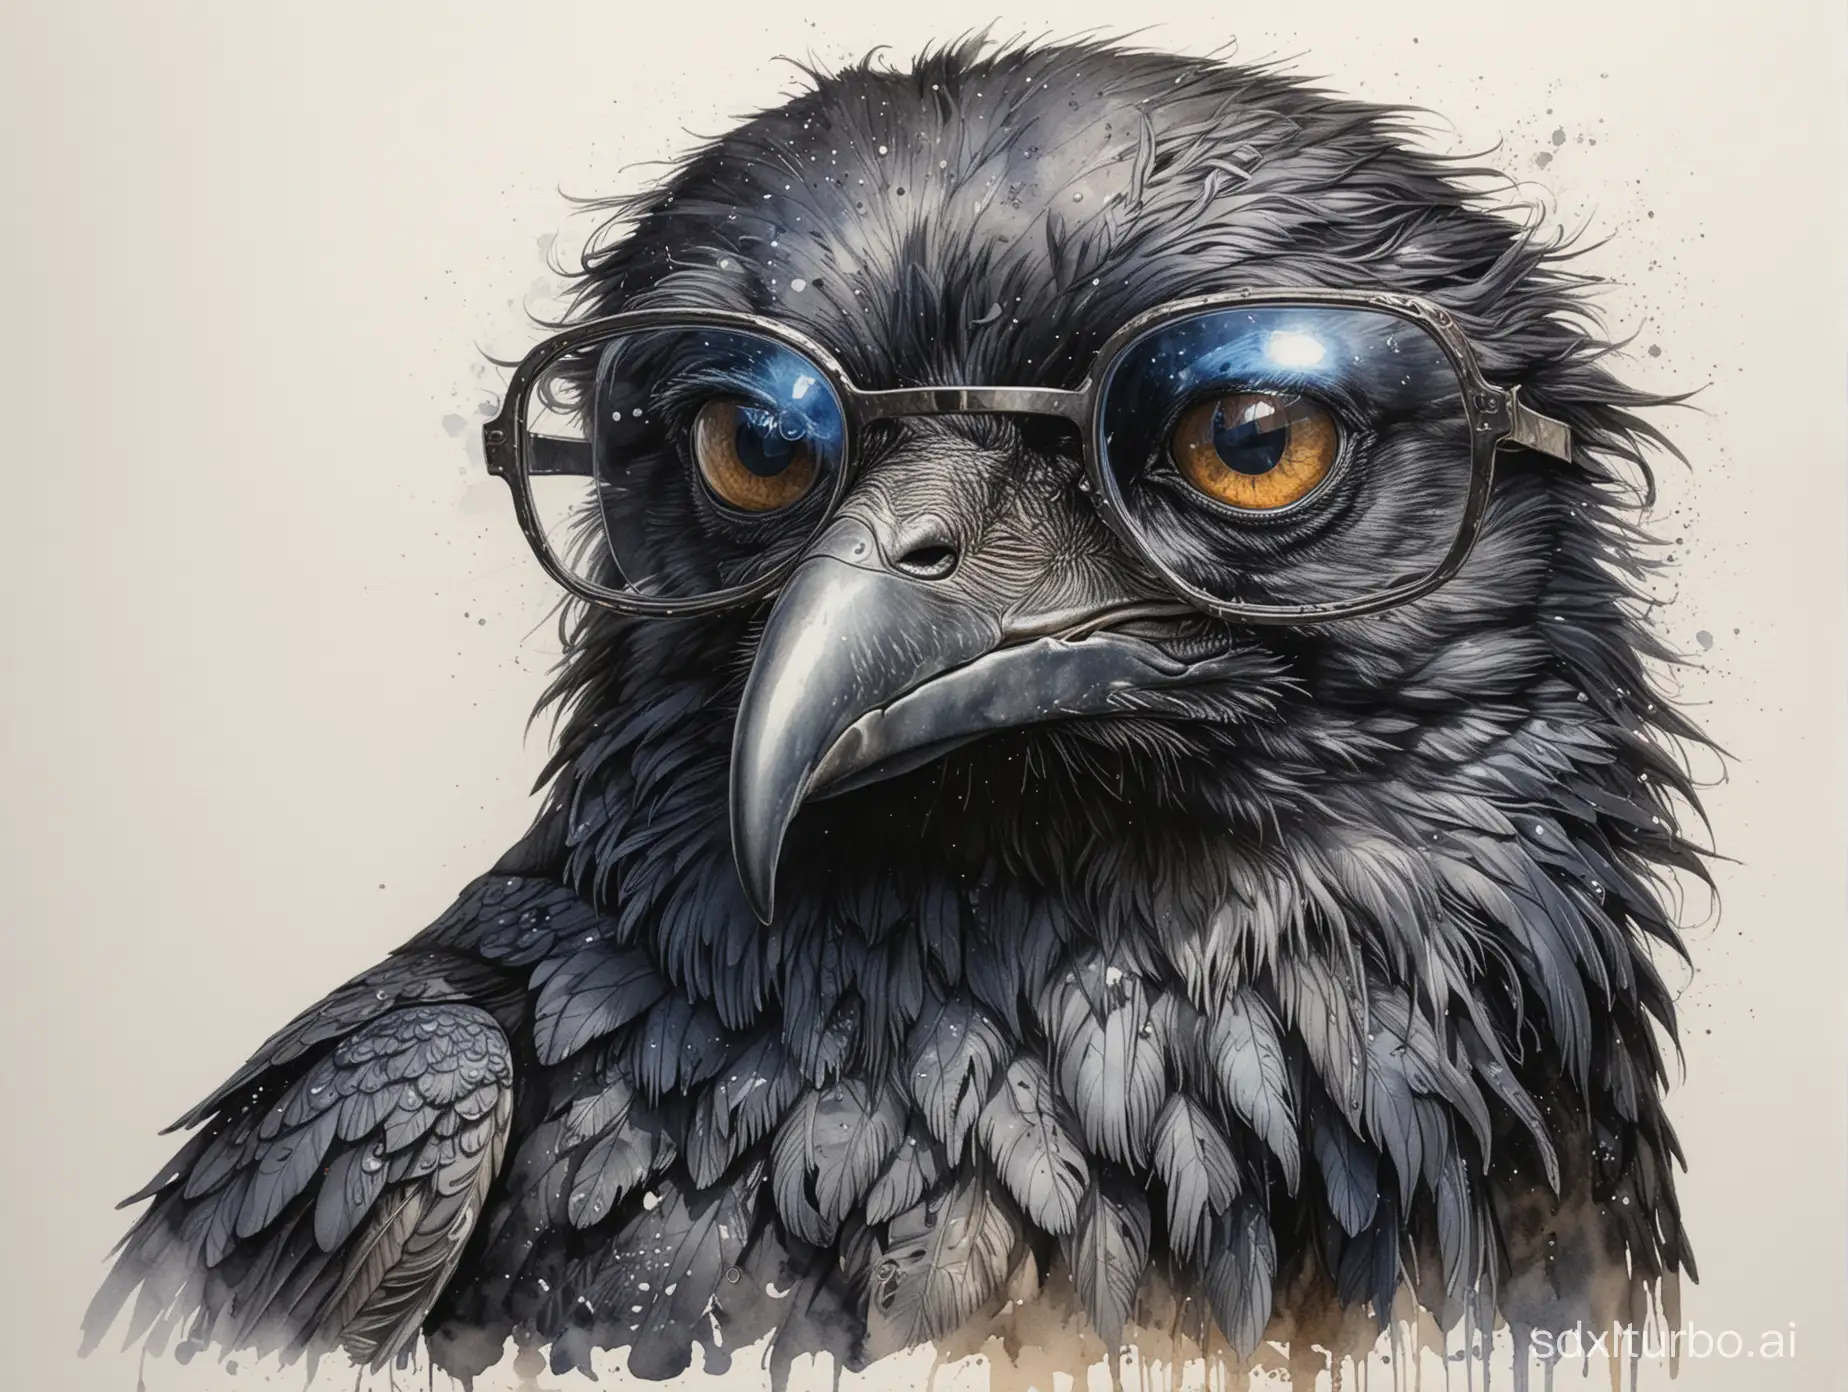 A disheveled raven with eye glasses, highly and delicately detailed drawing, intricated watercolor